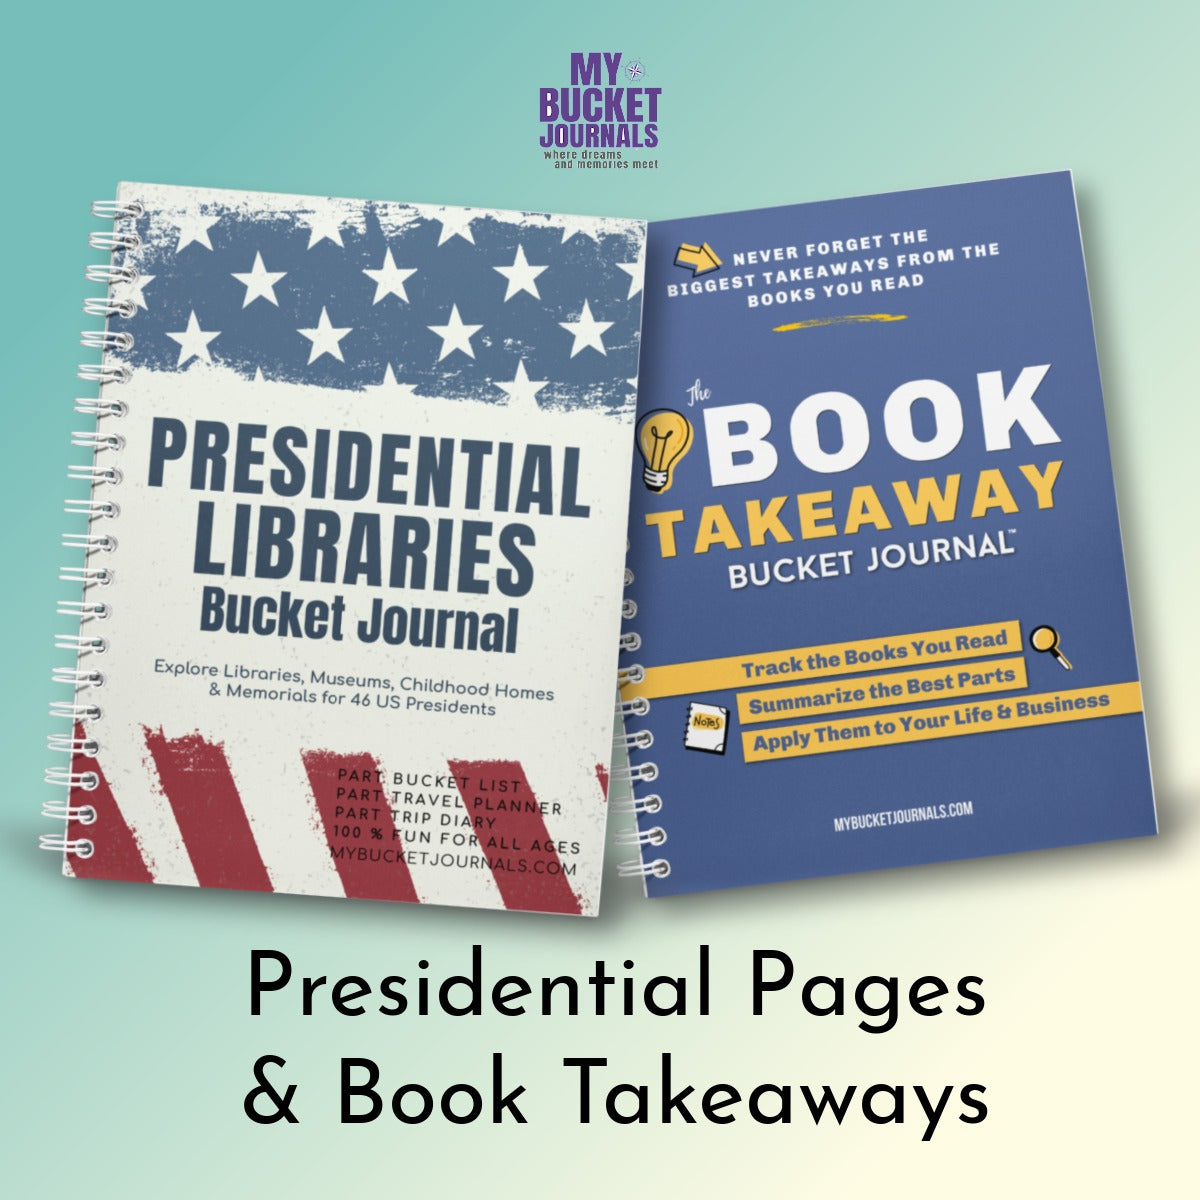 Presidential Pages & Book Takeaways